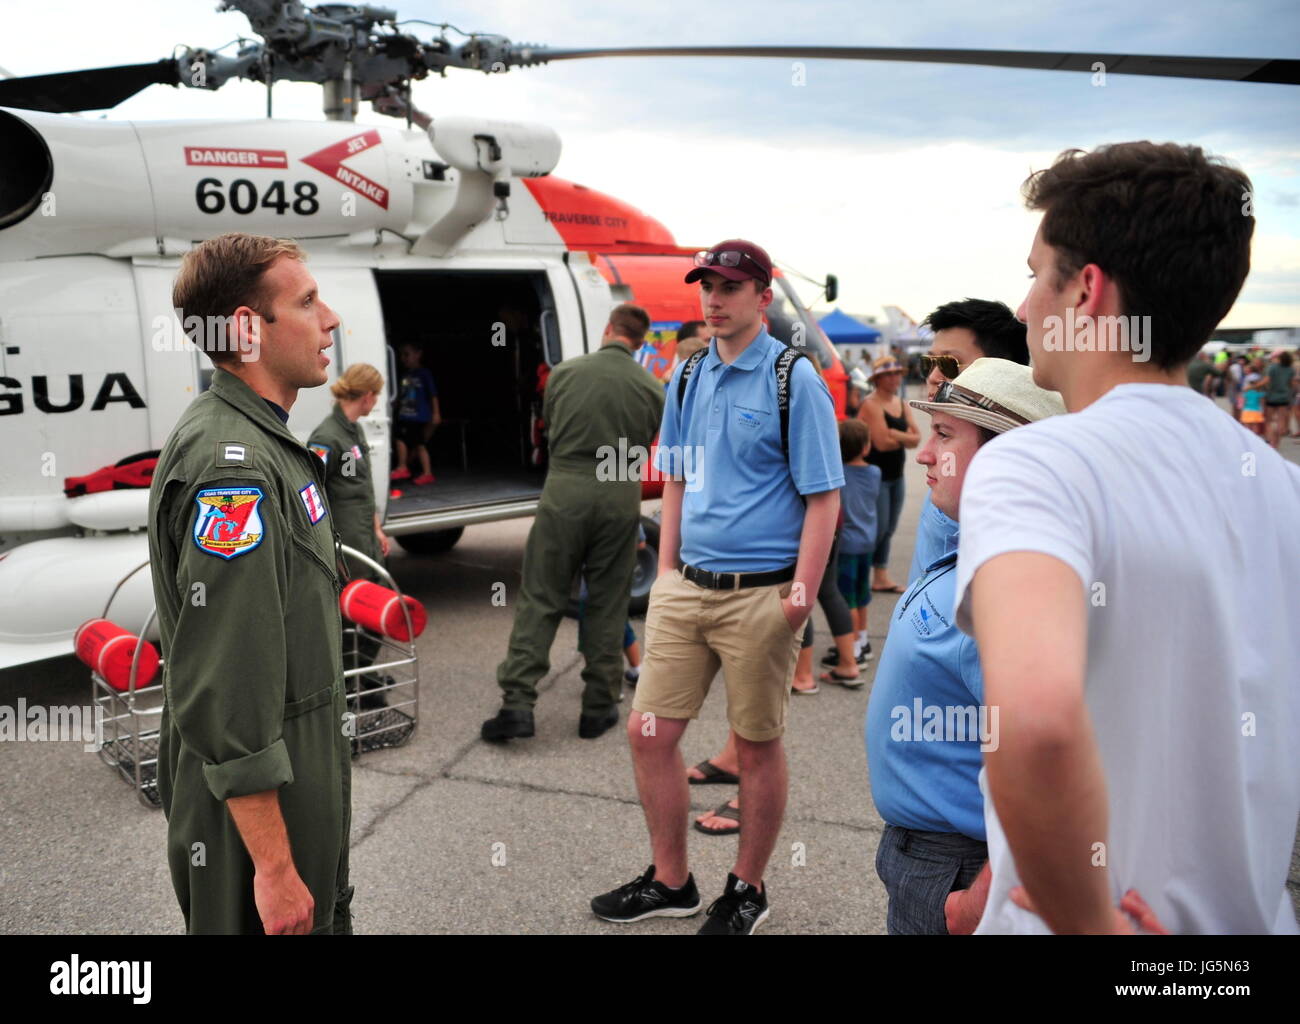 Lt. Ted Borny of Air Station Traverse City discusses the capabilities of the MH-60 helicopter during the “open ramp,” kicking-off the start of the National Cherry Festival in Traverse City, Michigan, June 30, 2017. More than 4,000 people attended the event at the air station to get up close and personal with aircraft and crews that were to participate in the festival Air Show. (U.S. Coast Guard photo by Master Chief Petty Officer Alan Haraf) Stock Photo